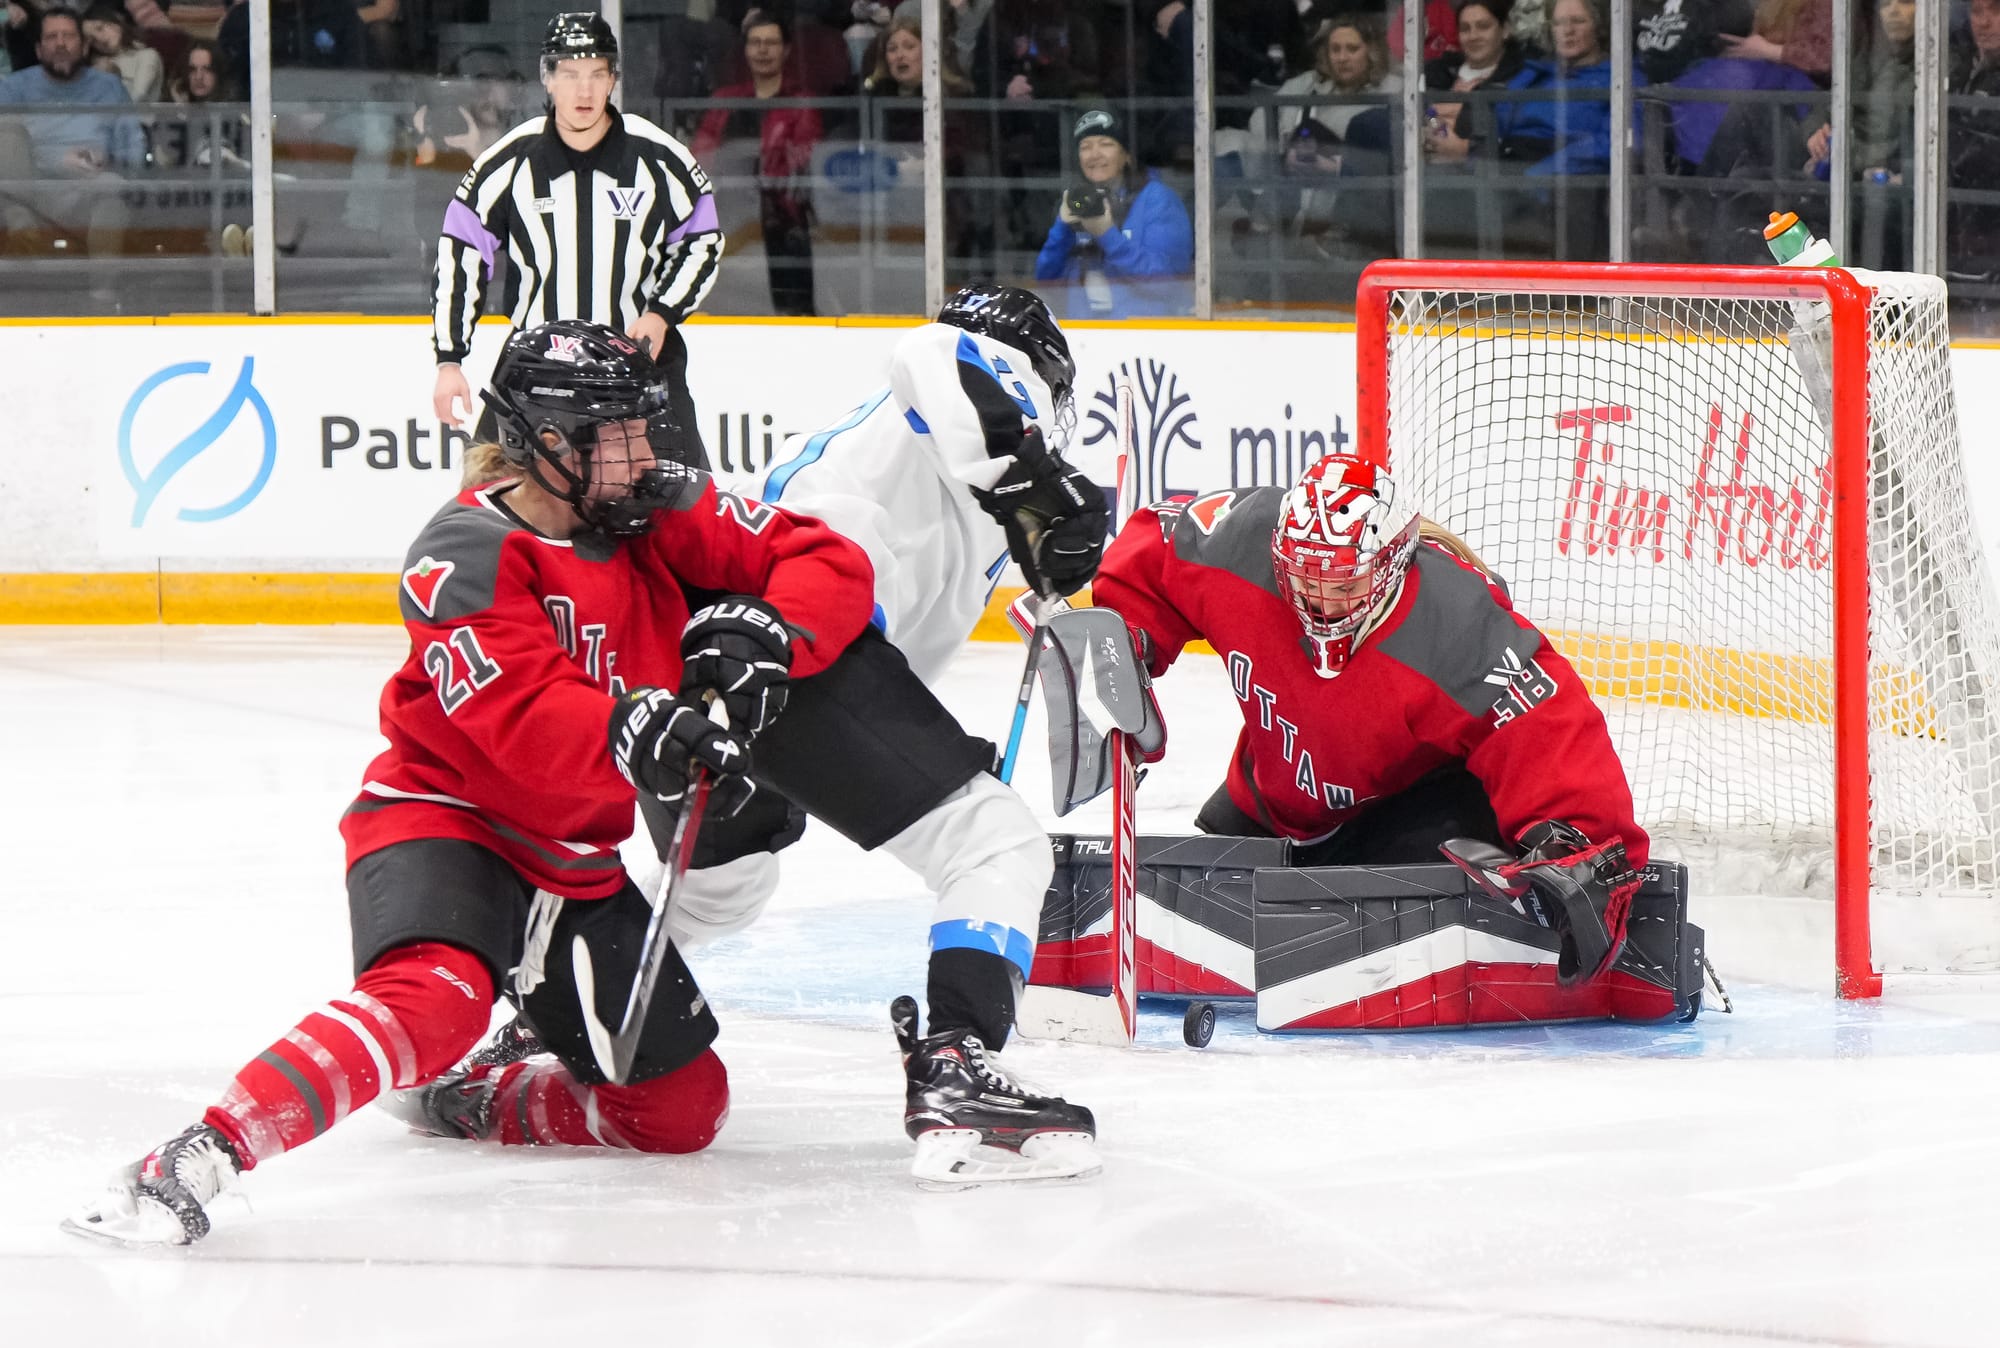 Wearing their red home uniforms, Emerance Maschmeyer makes a save as Ashton Bell tries to defend against a Toronto player.